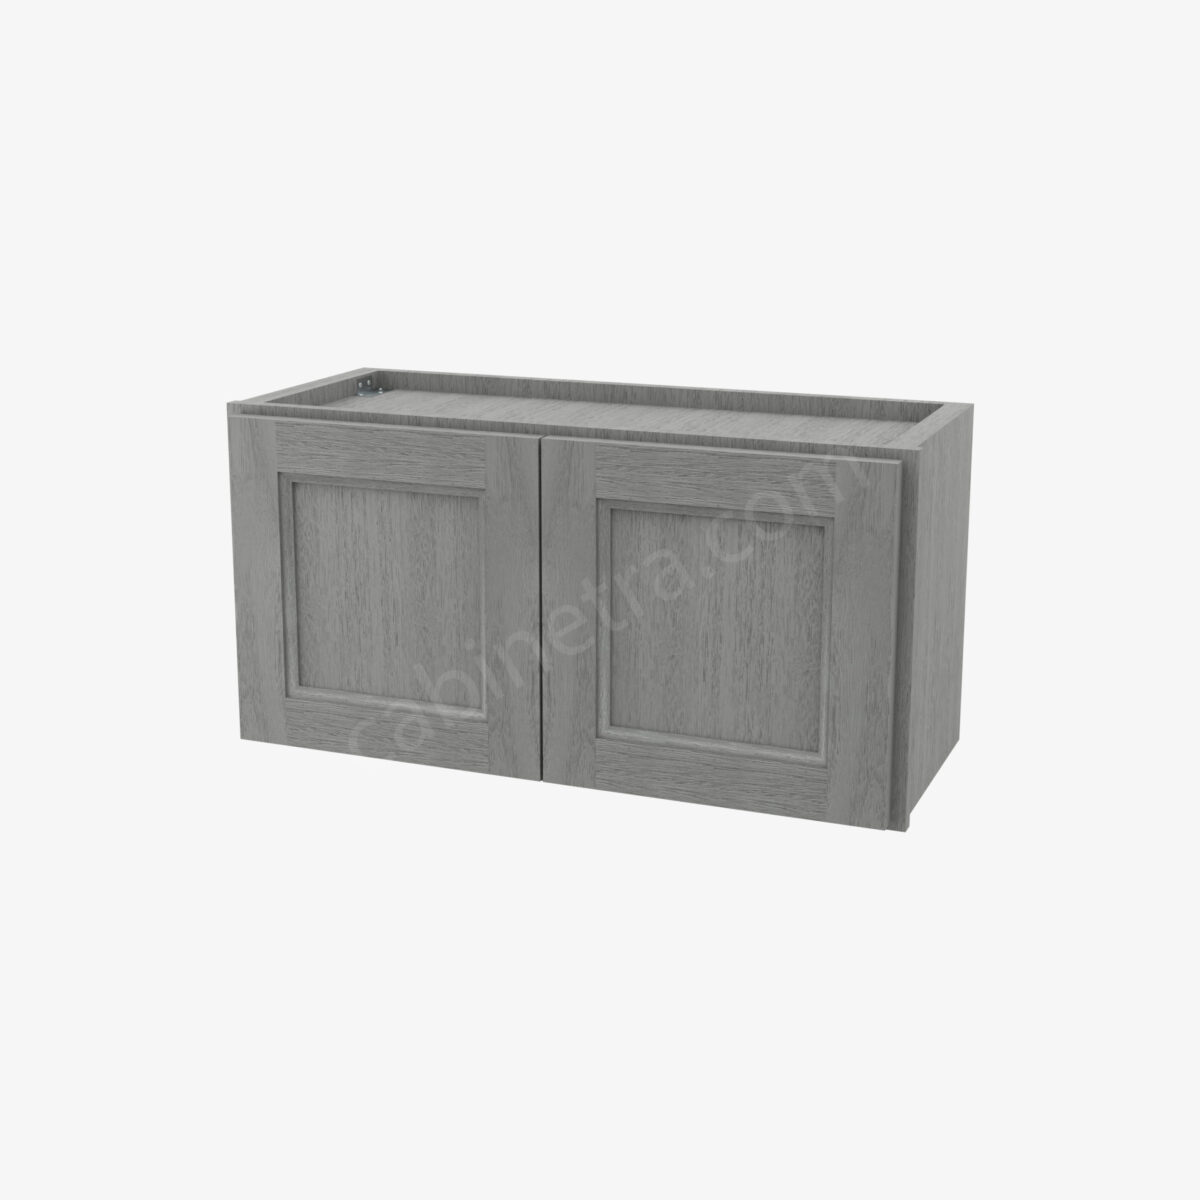 TG W3015B 0 Forevermark Midtown Grey Cabinetra scaled